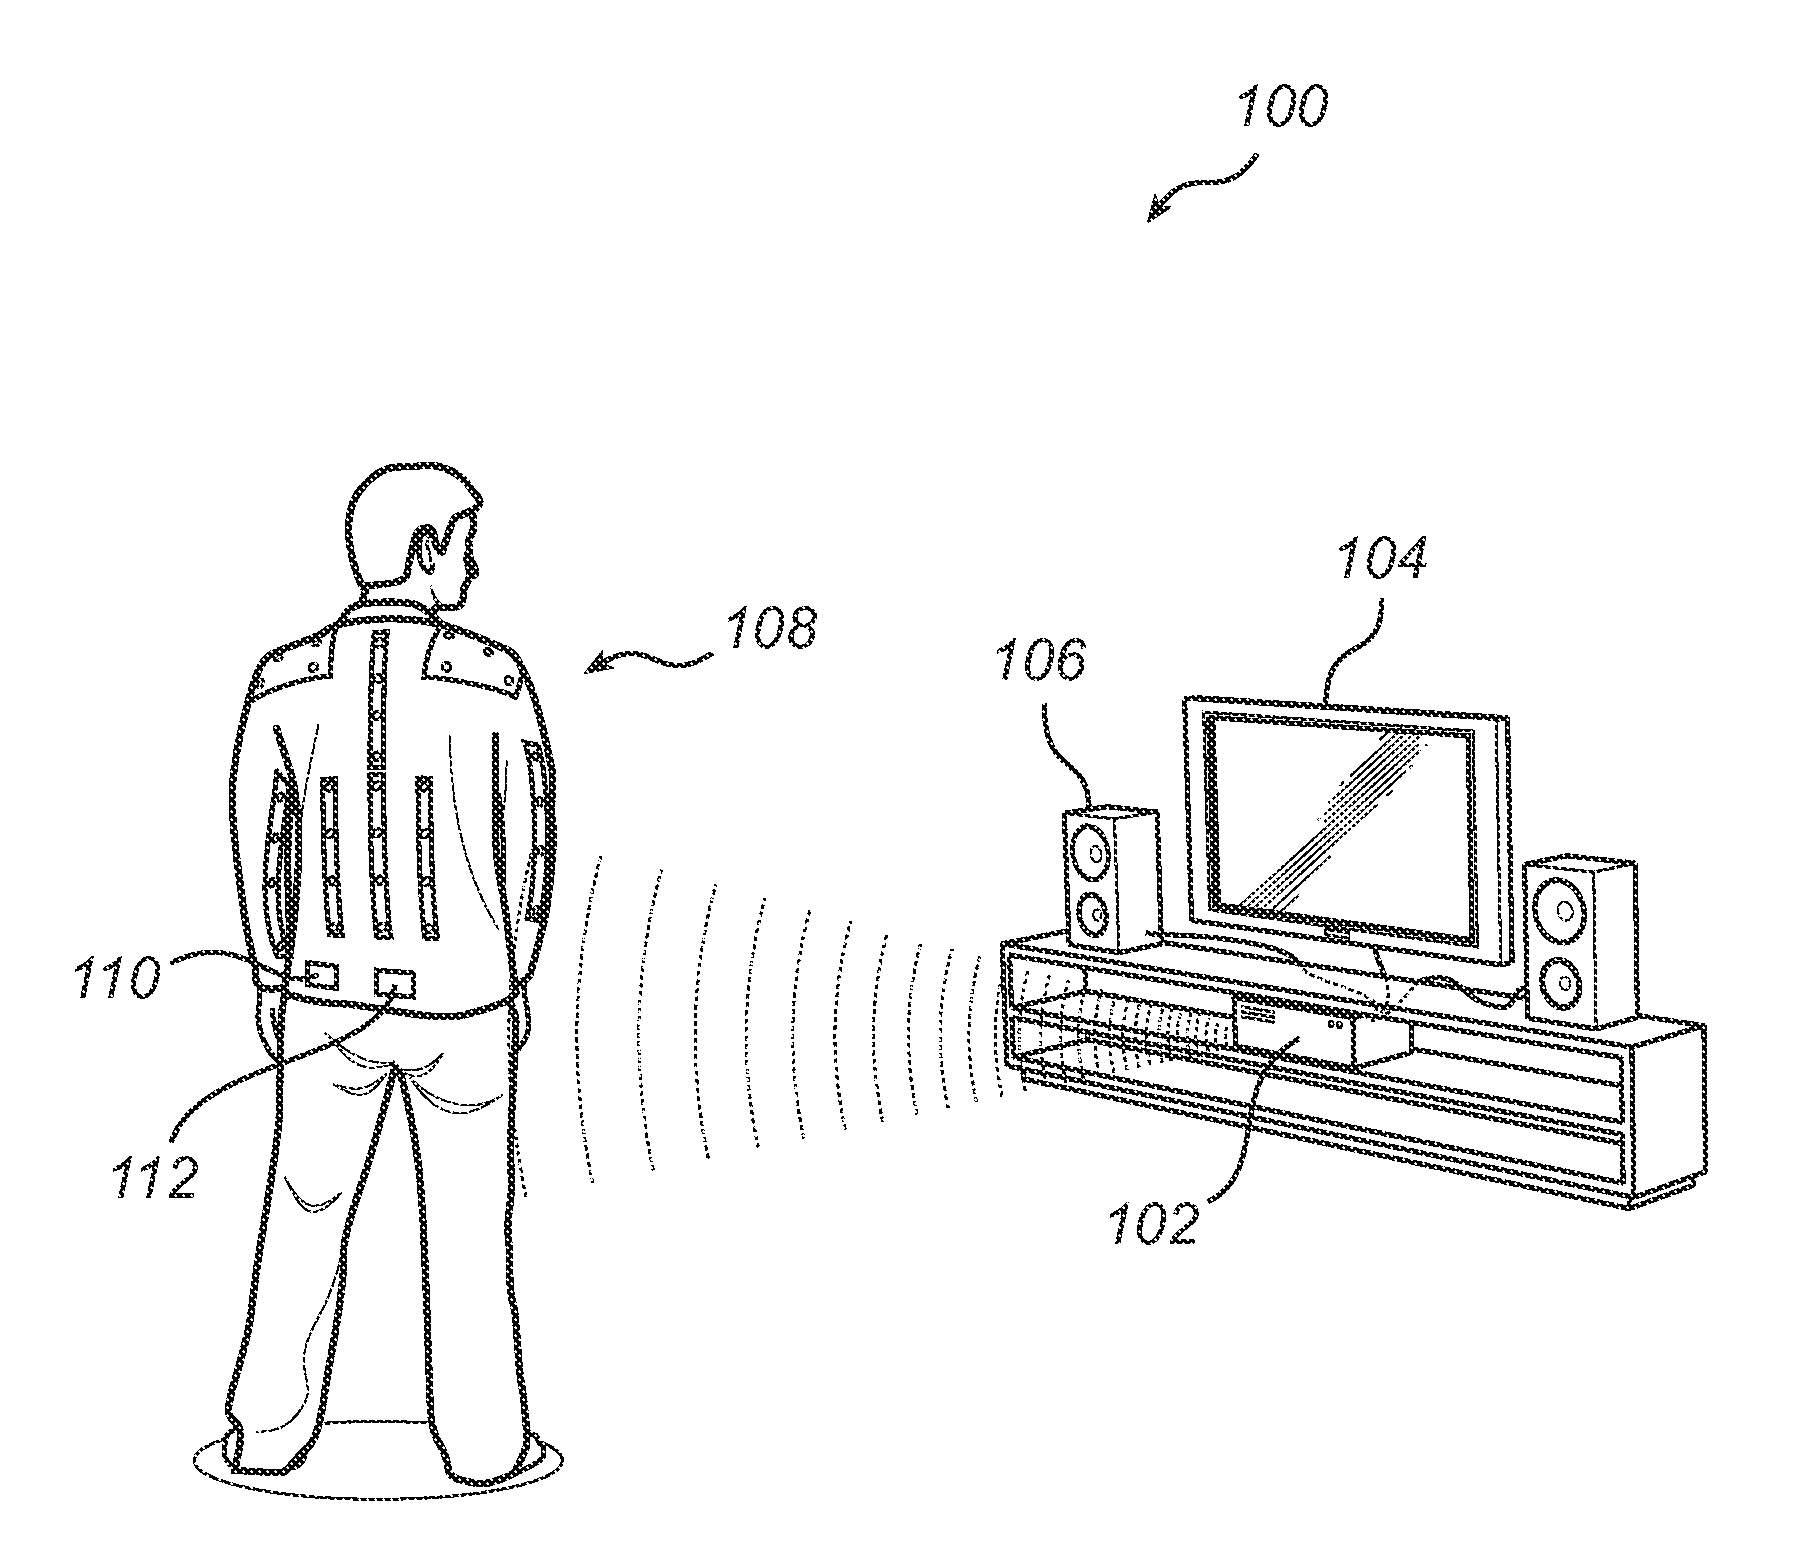 Method and system for conveying an emotion